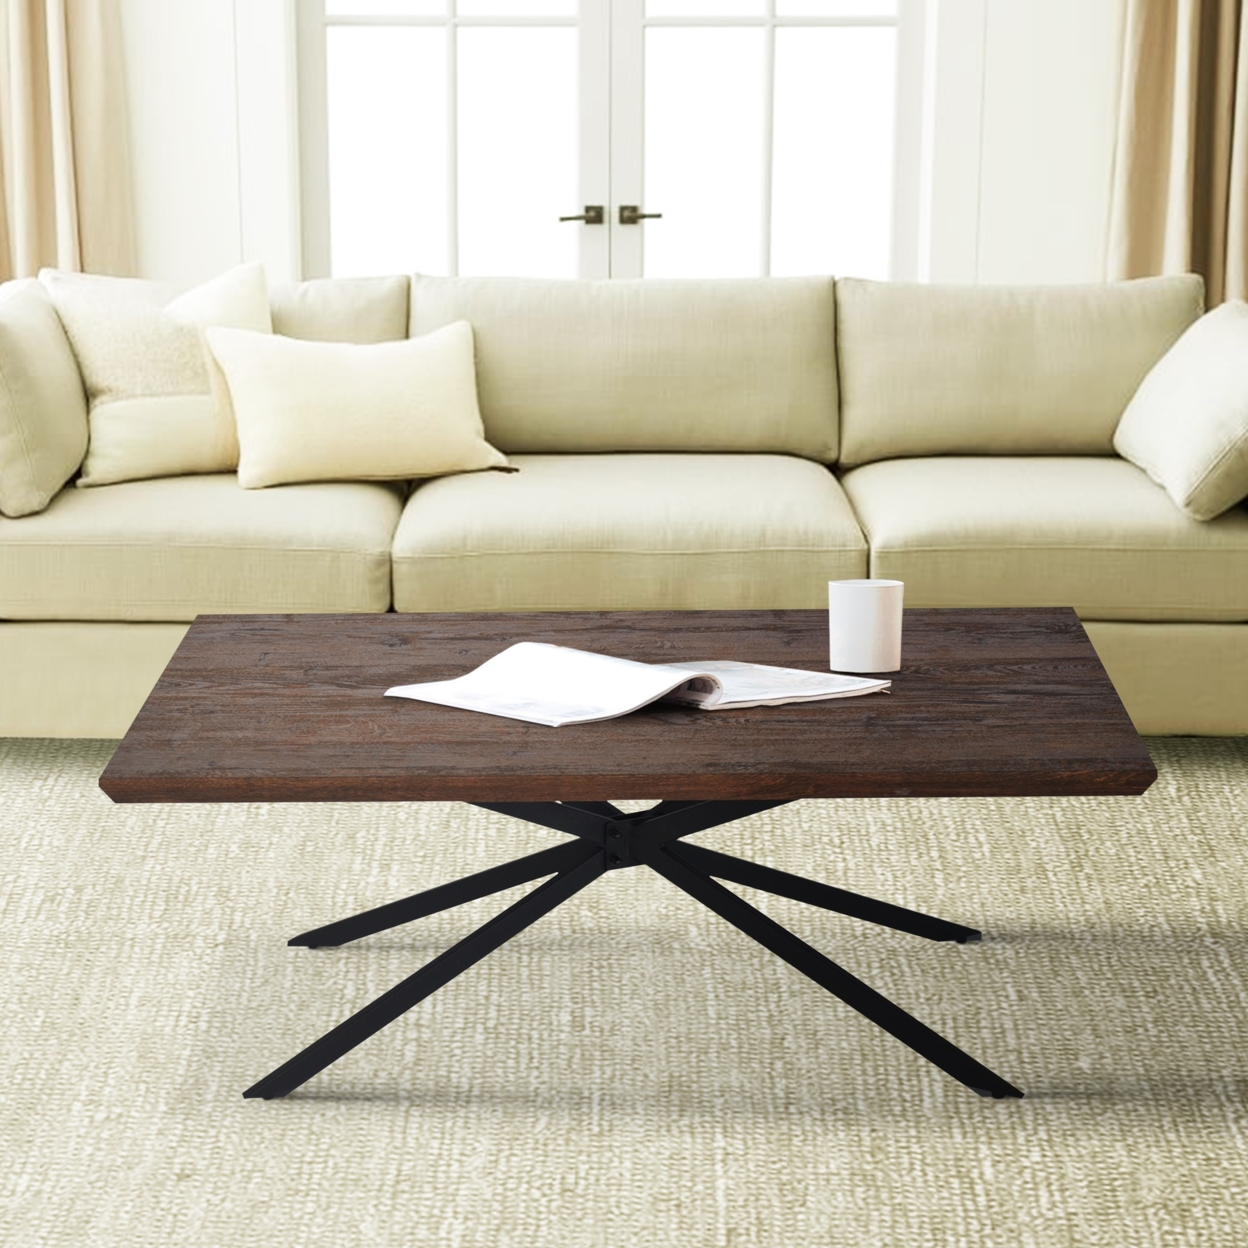 Rectangular Wooden Coffee Table With Boomerang Legs, Natural Brown Sonoma And Black- Saltoro Sherpi